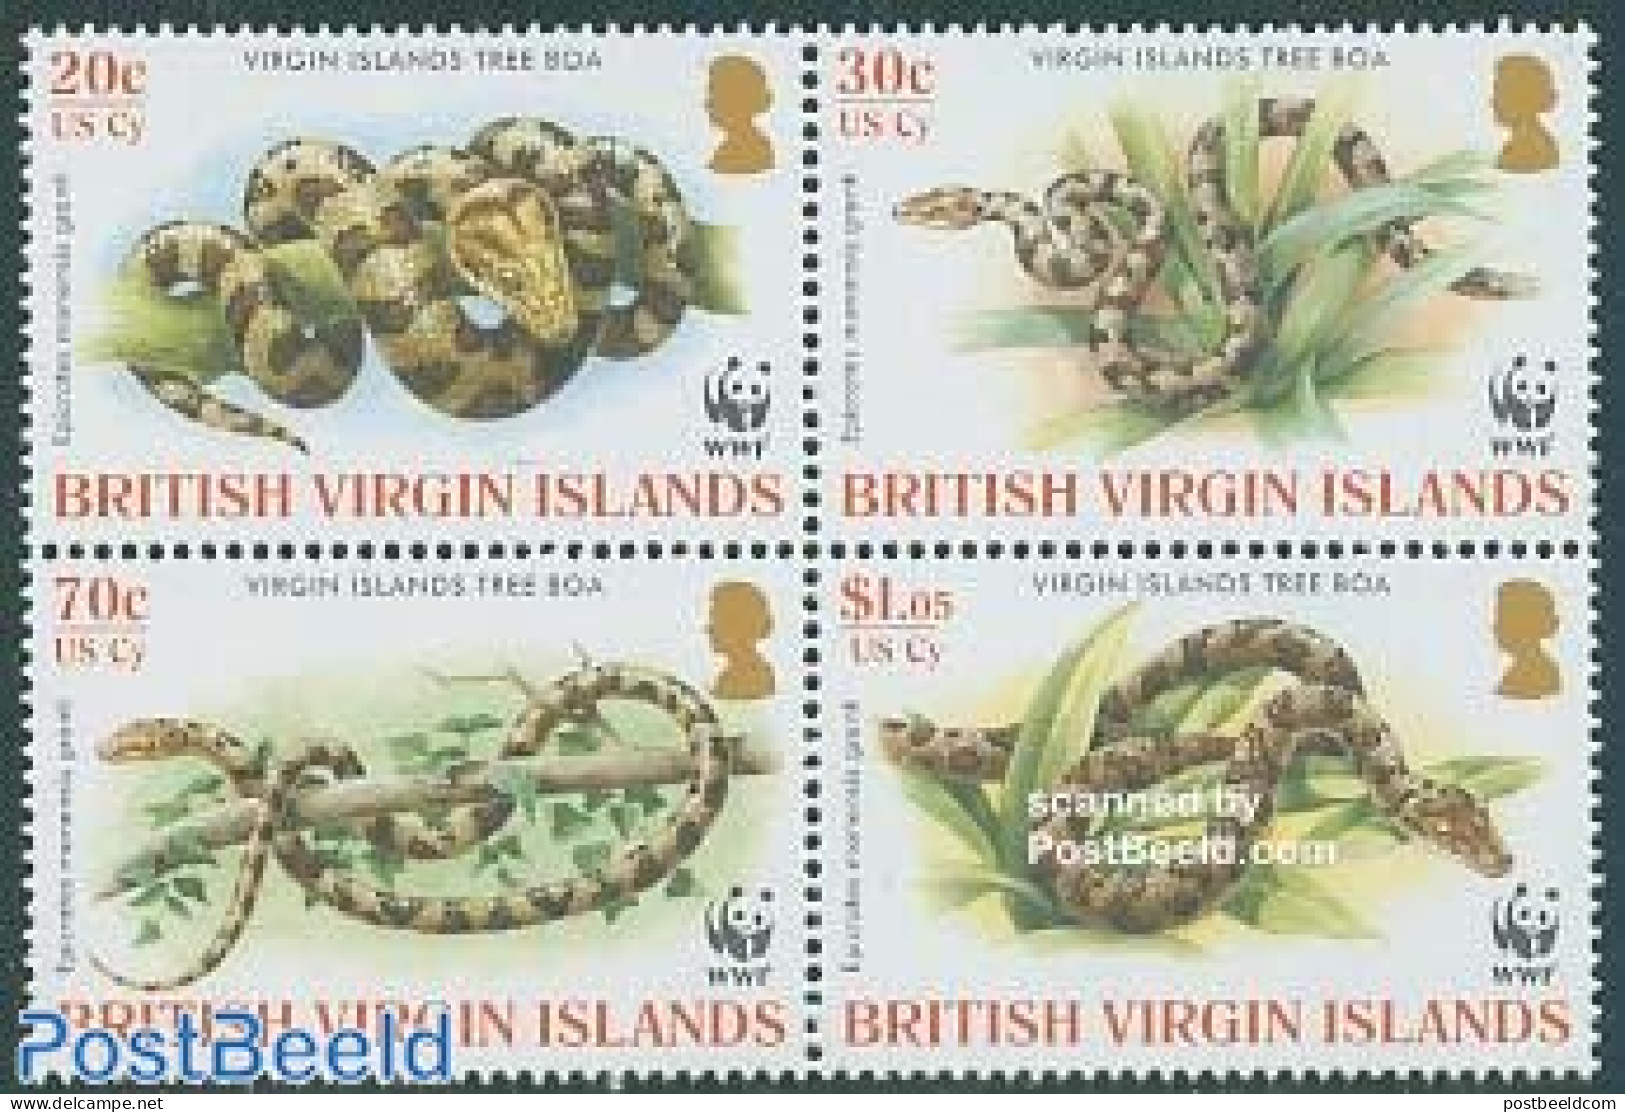 Virgin Islands 2005 WWF, Snakes 4v [+], Mint NH, Nature - Reptiles - Snakes - World Wildlife Fund (WWF) - Iles Vièrges Britanniques